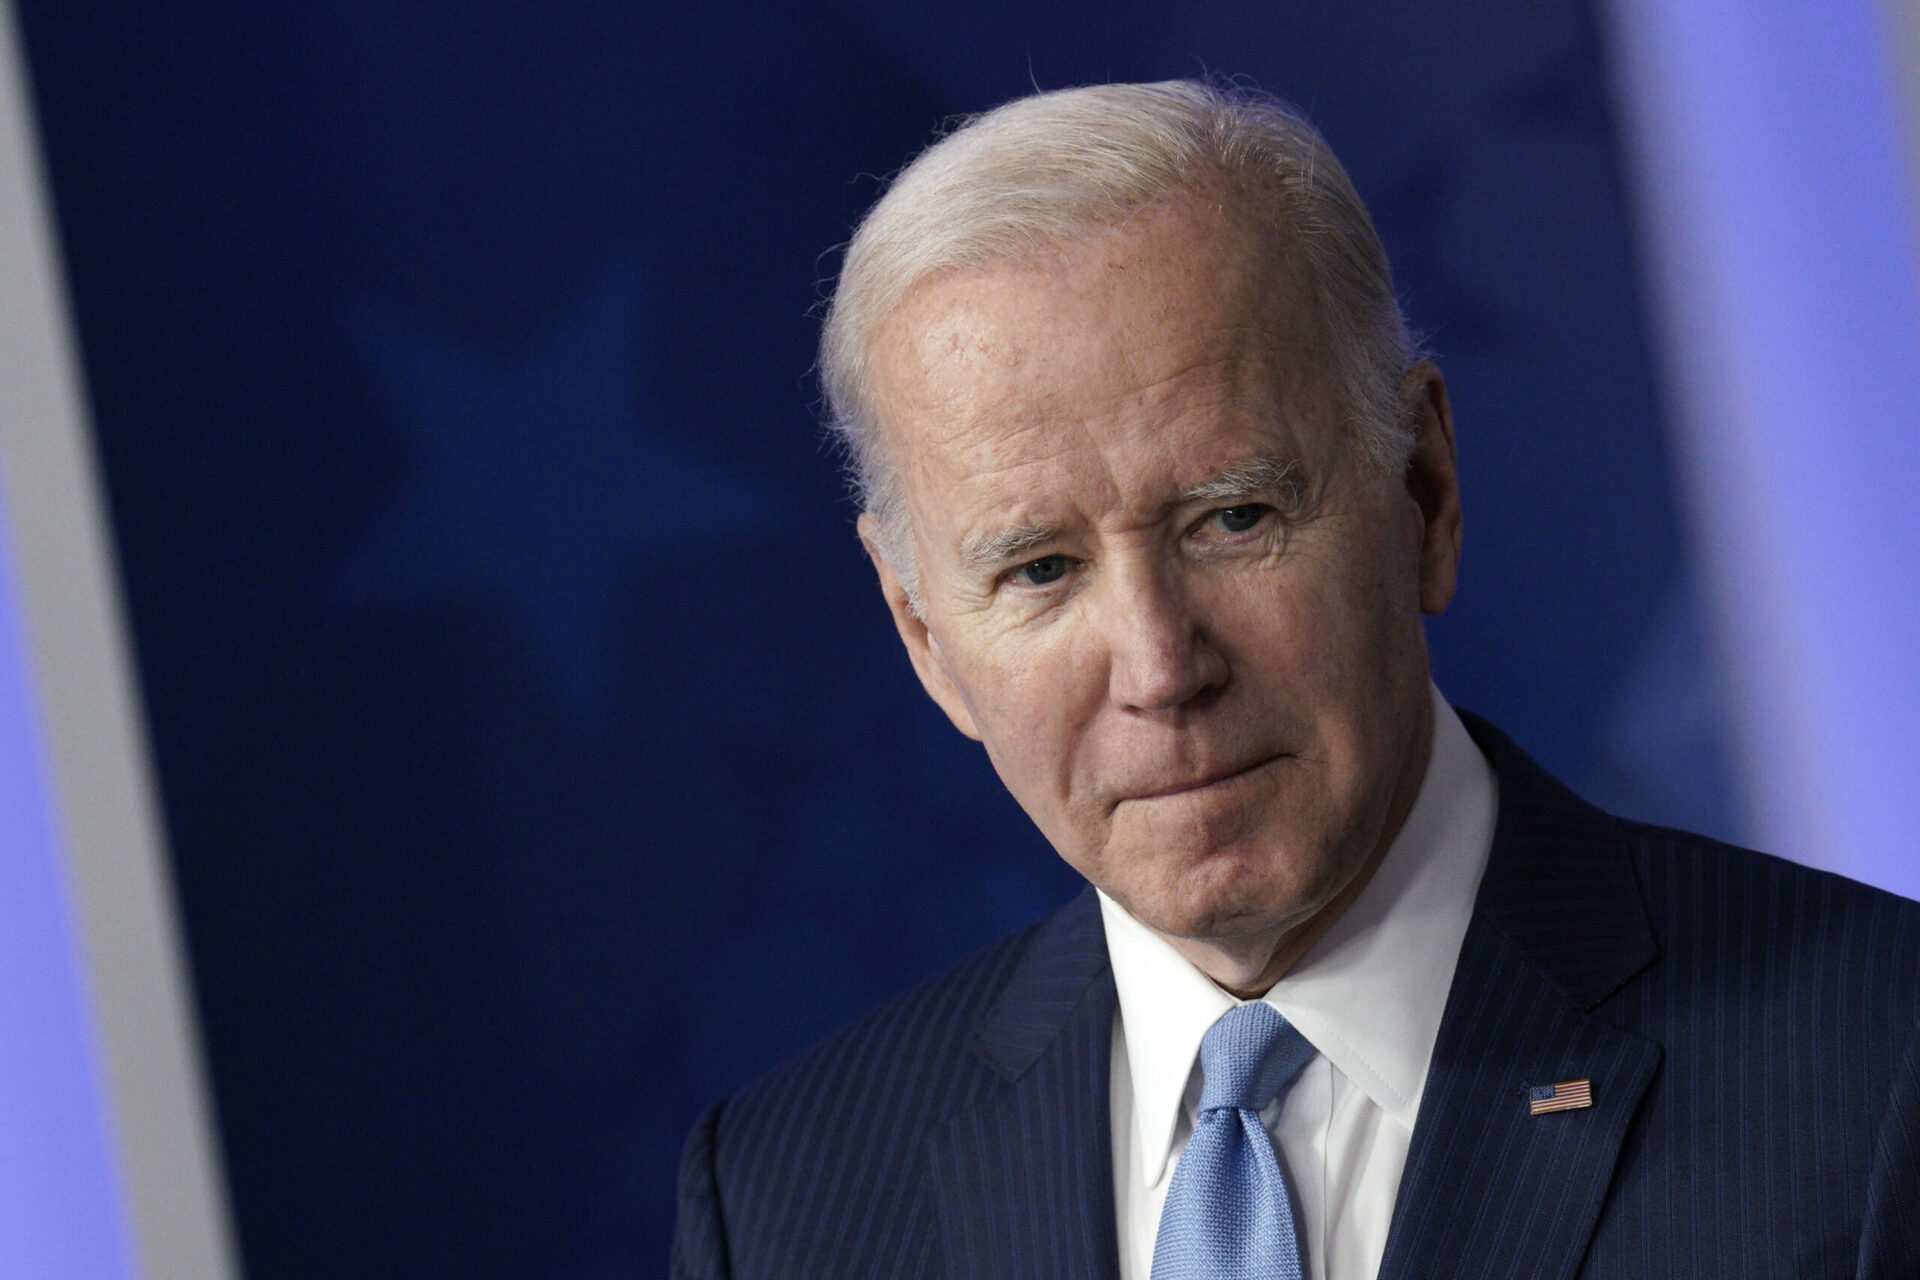 Ivy League School That Housed Biden Center Pressed to End FBI China Spy Probe After Big Beijing Donations